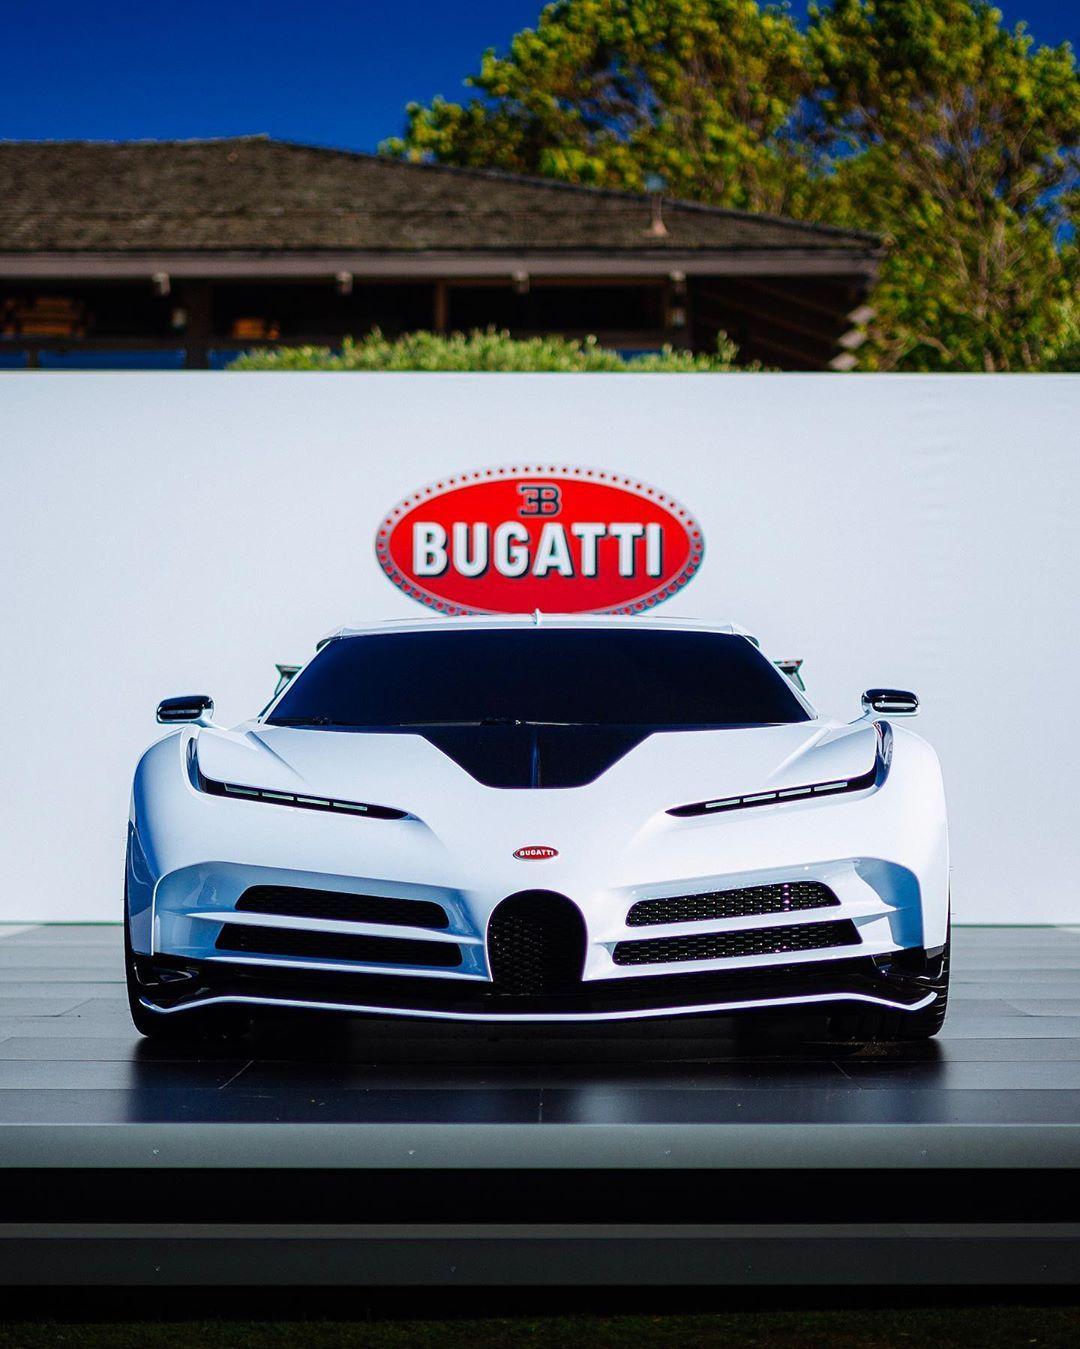 Bugatti Centodieci reveal today at ! What a